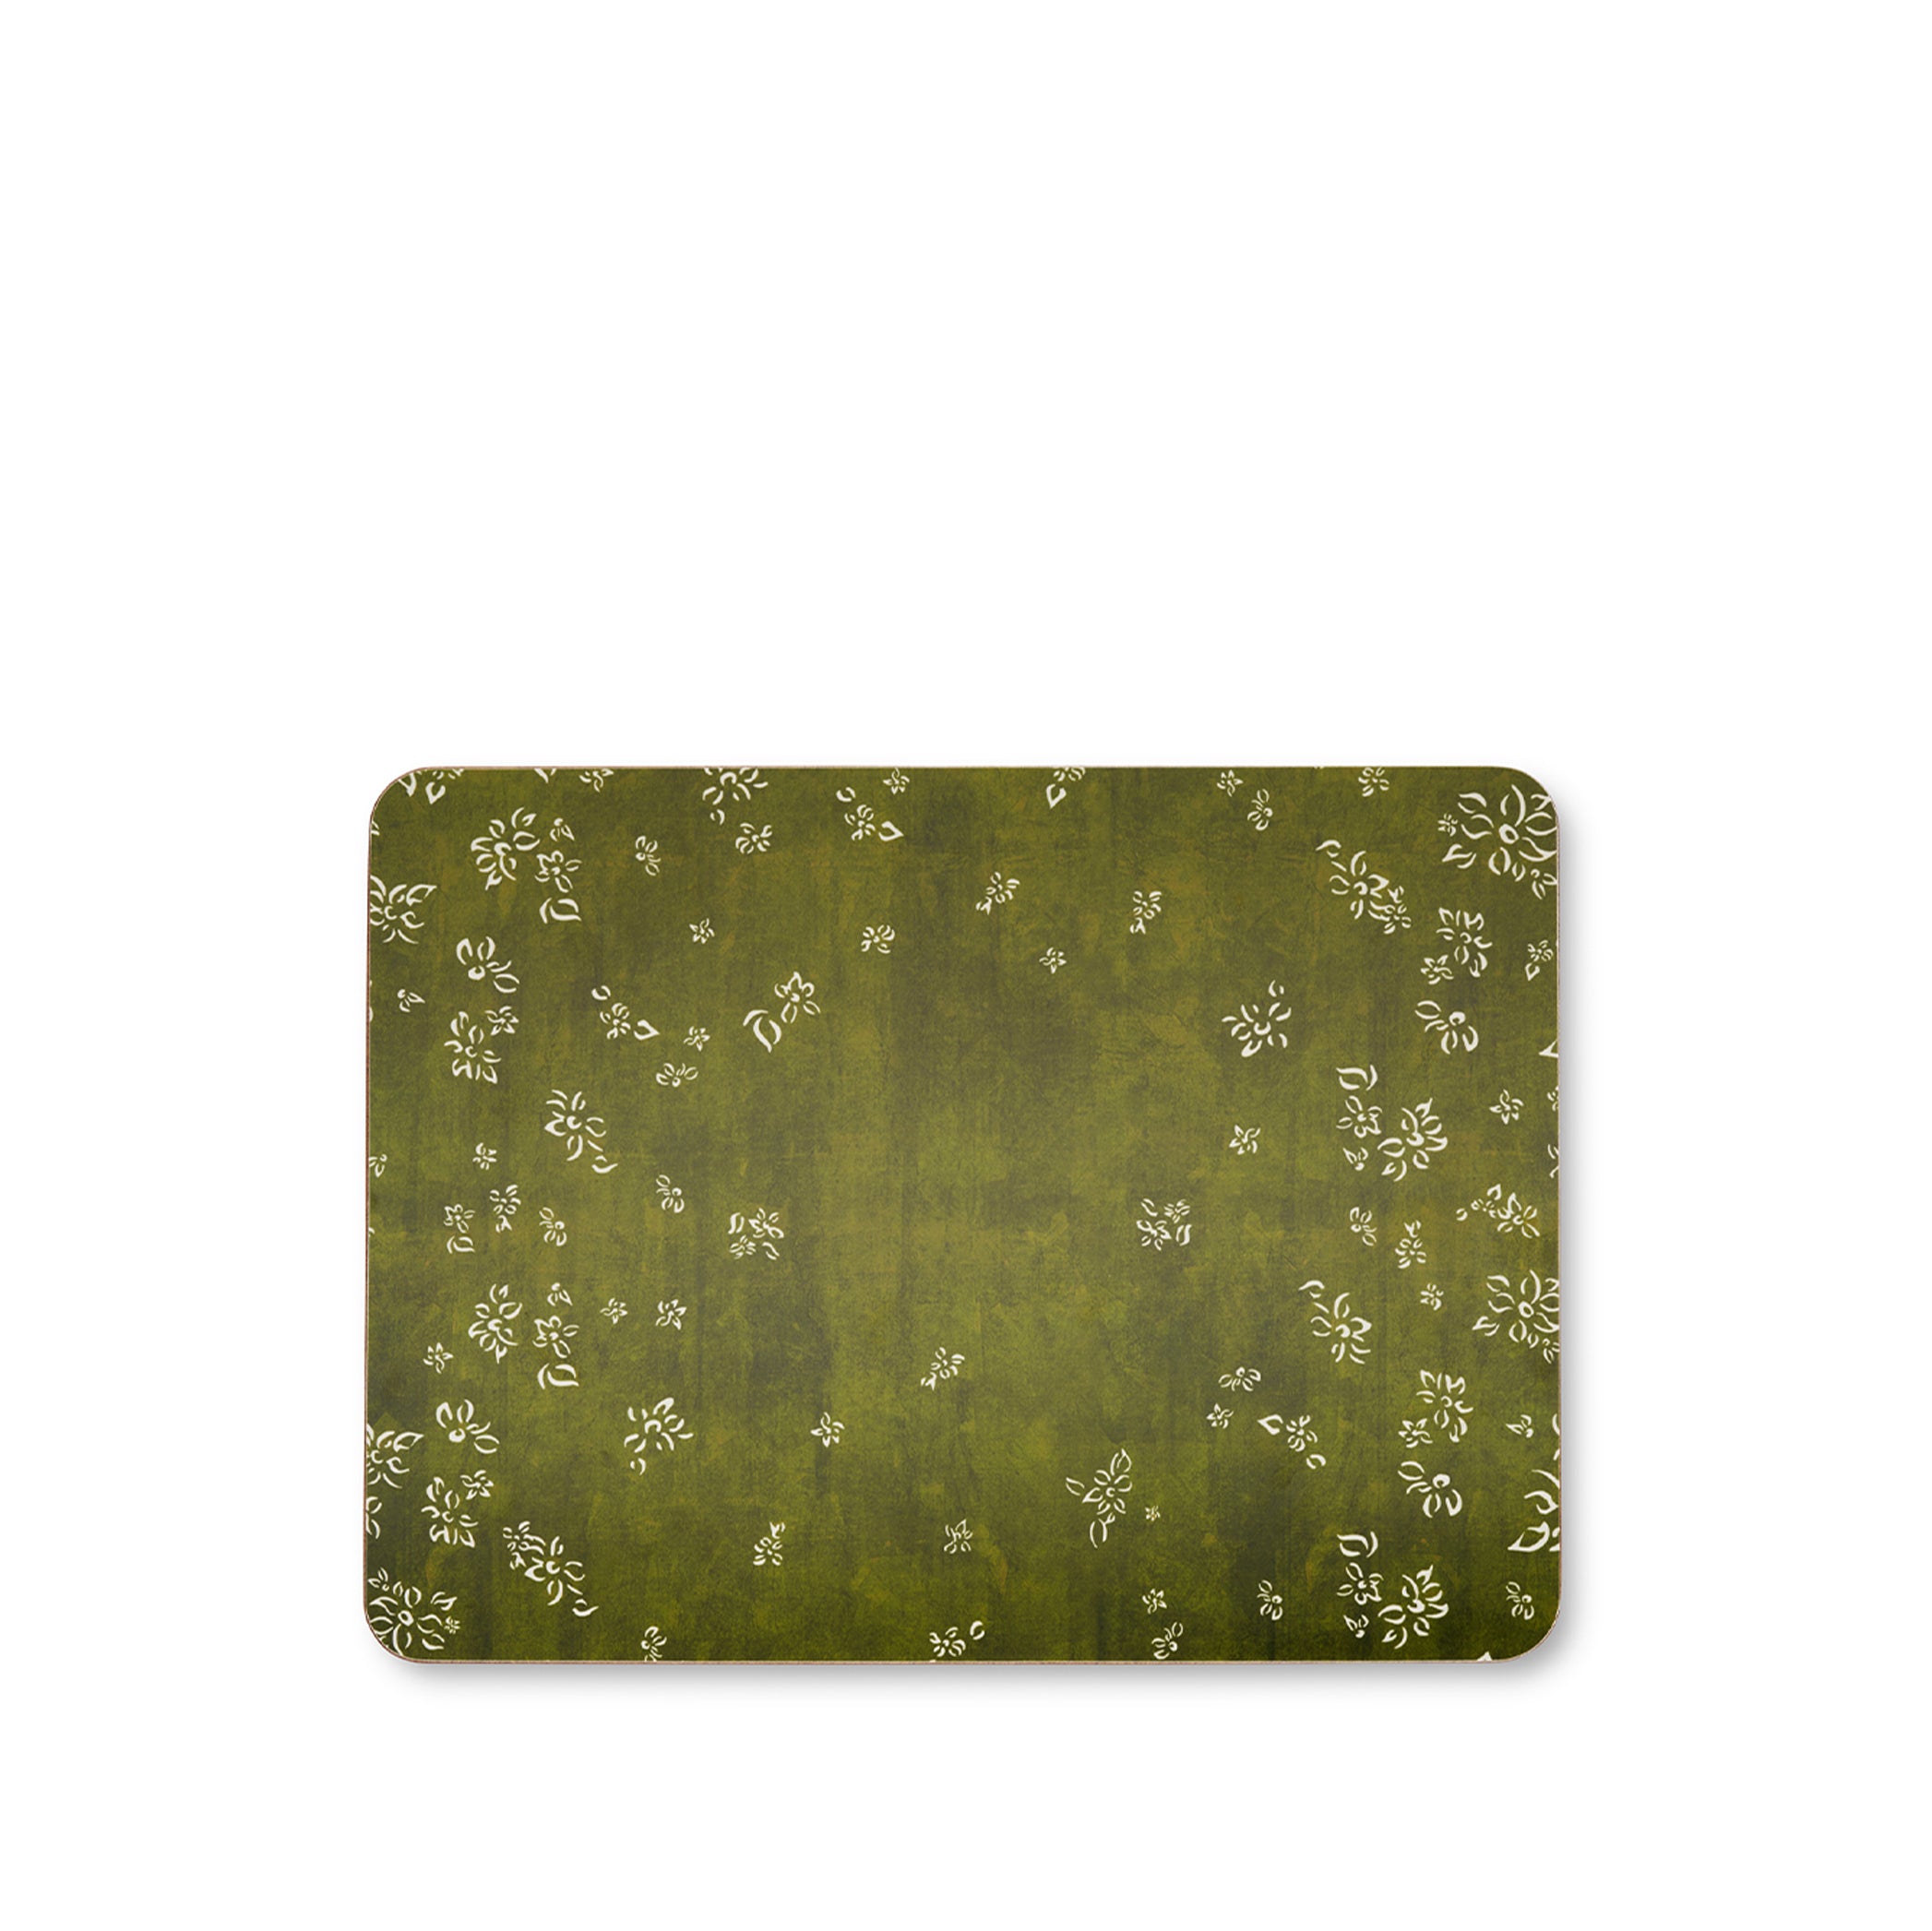 Falling Flower Cork-Backed Placemat in Avocado Green